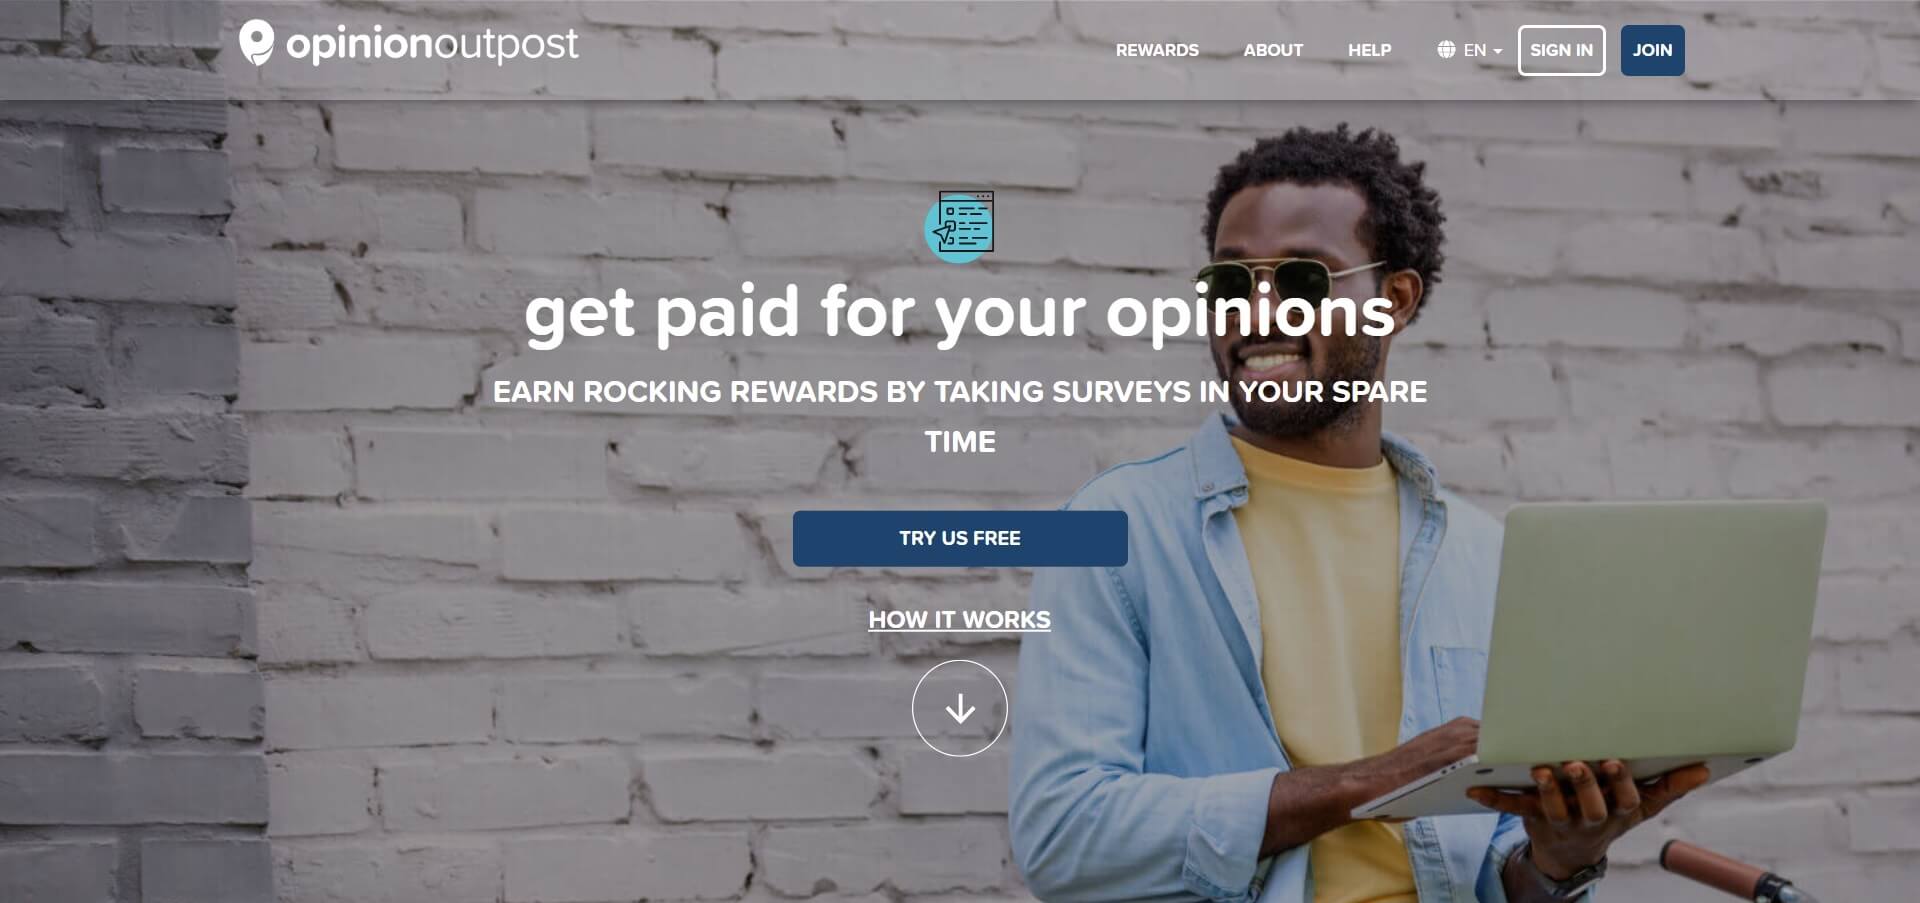 opinion outpost main website